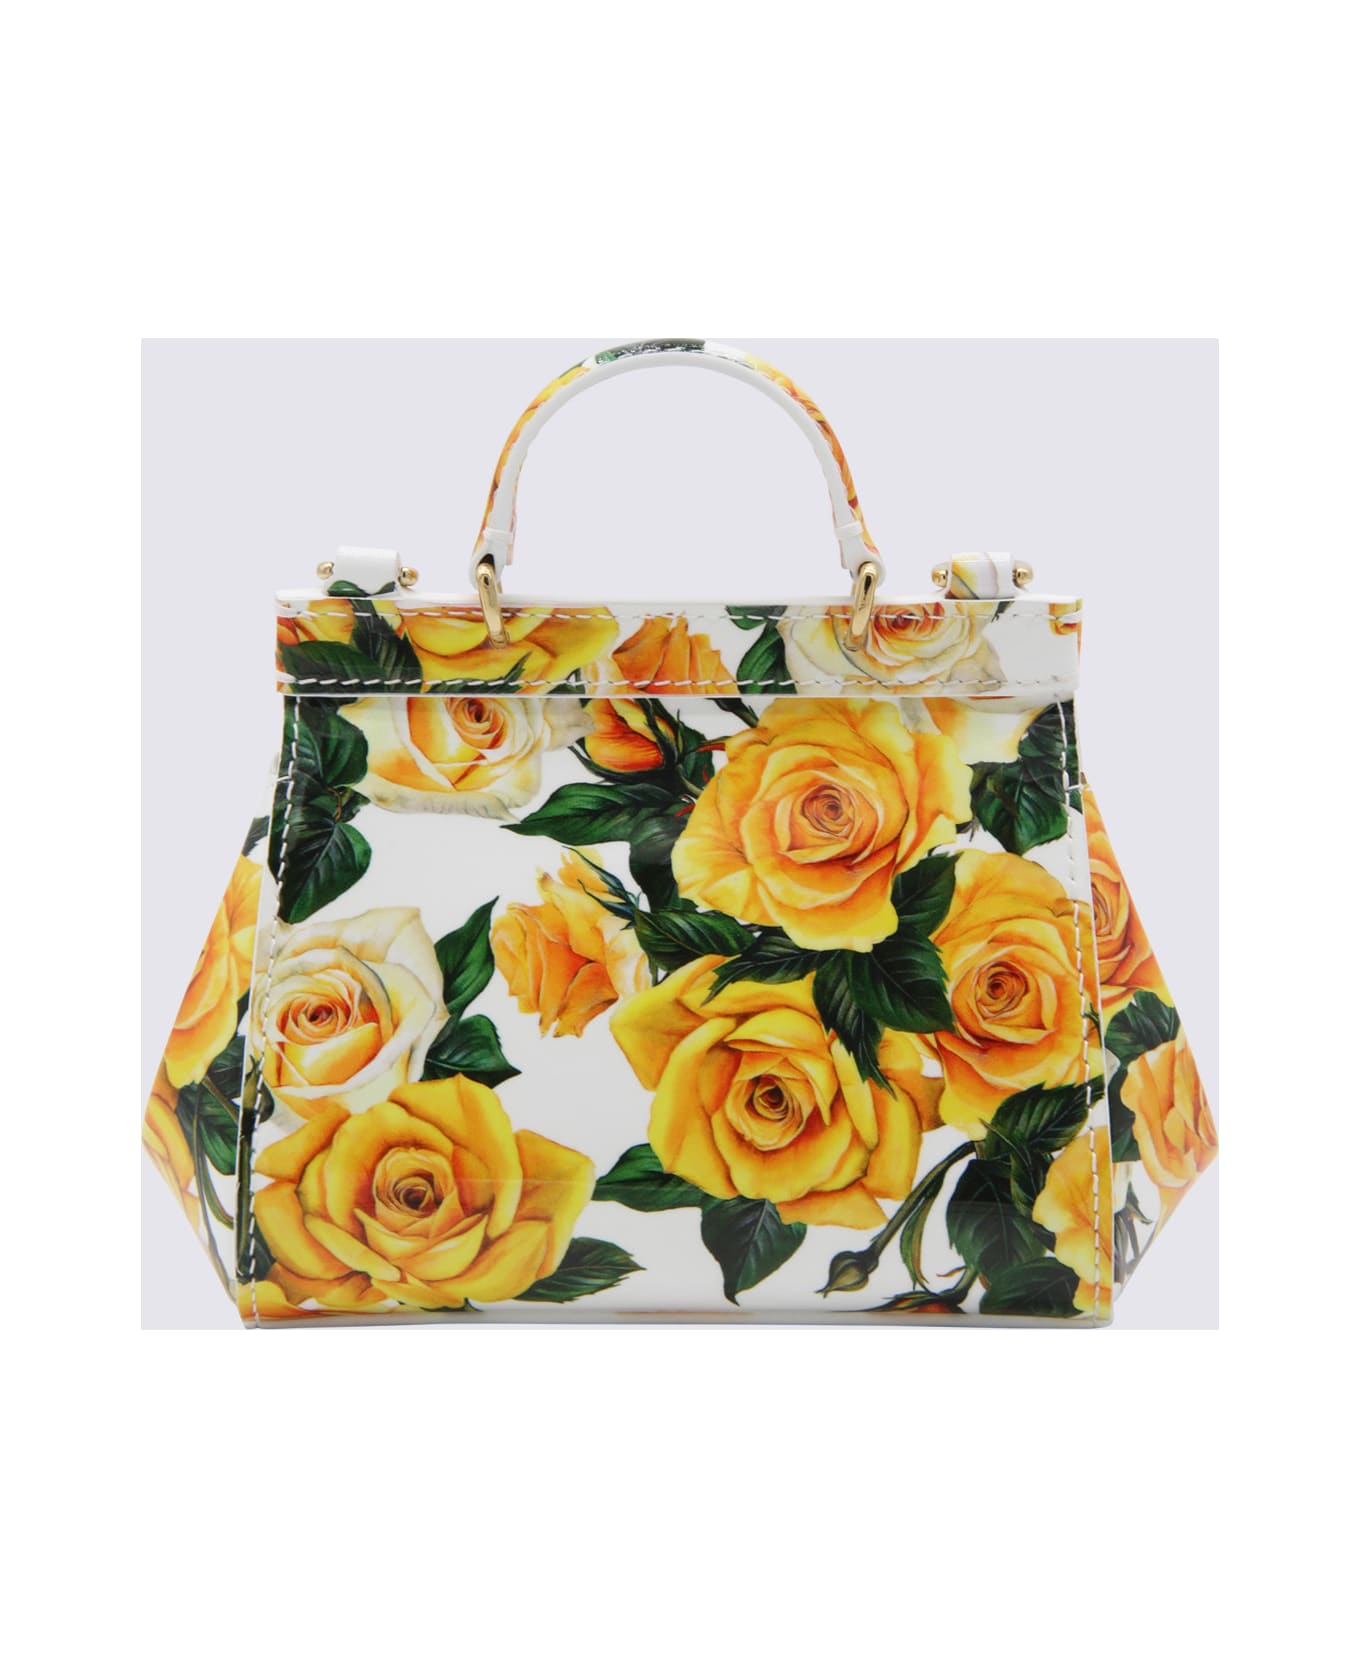 Dolce Brown & Gabbana White And Yellow Leather Sicily Tote Bag - ROSE GIALLE F.DO BIANCO